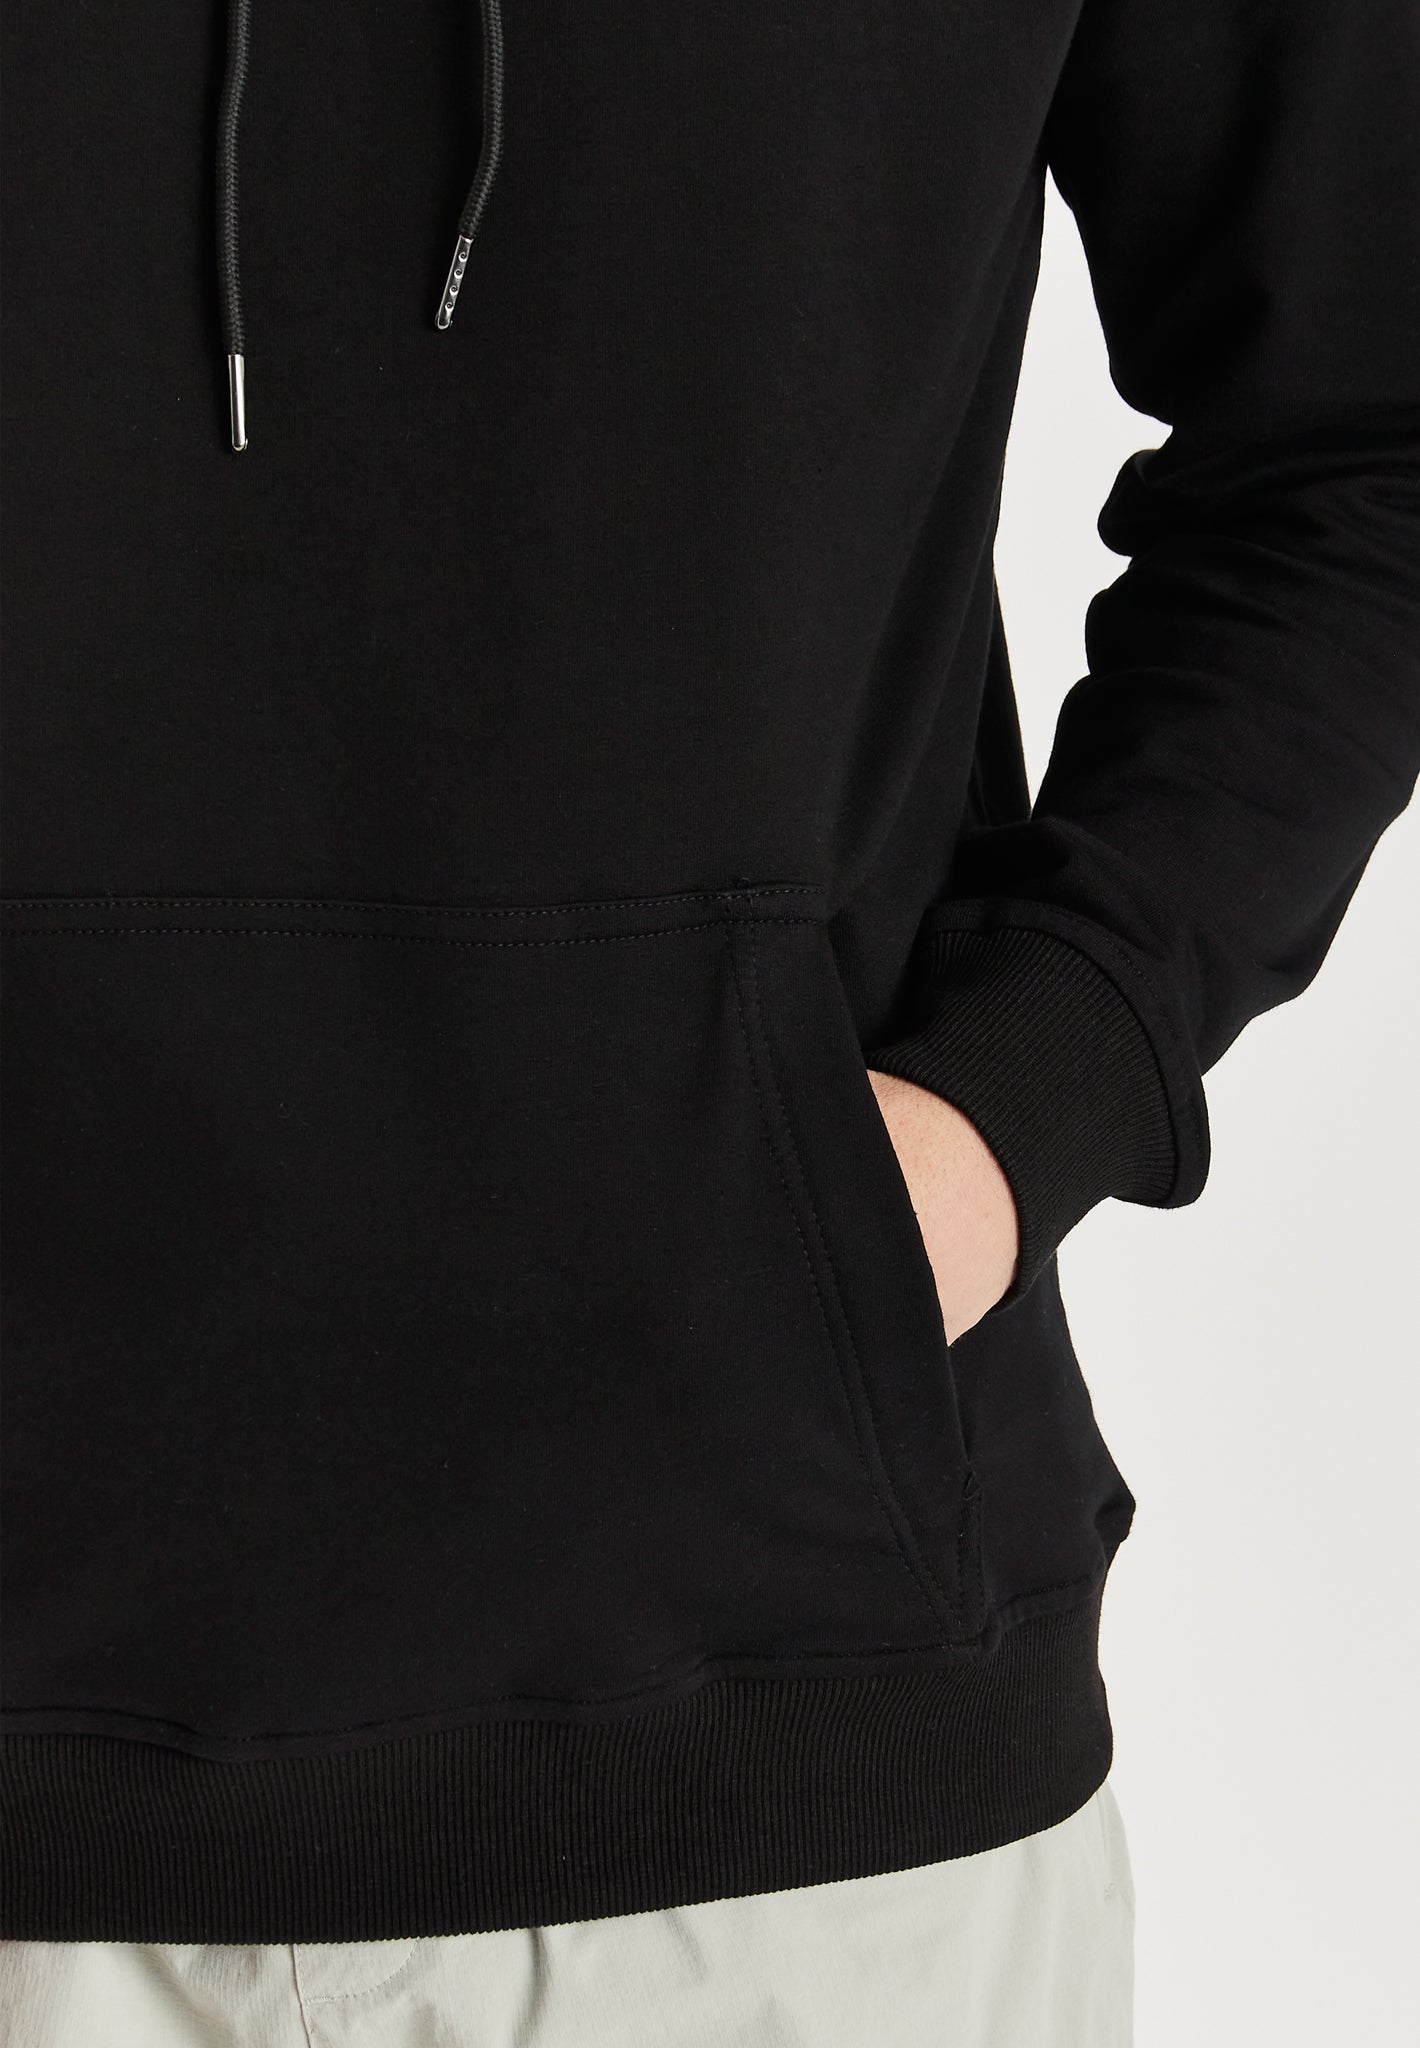 LUXURY HOODIES | Luciano Fashion Limited